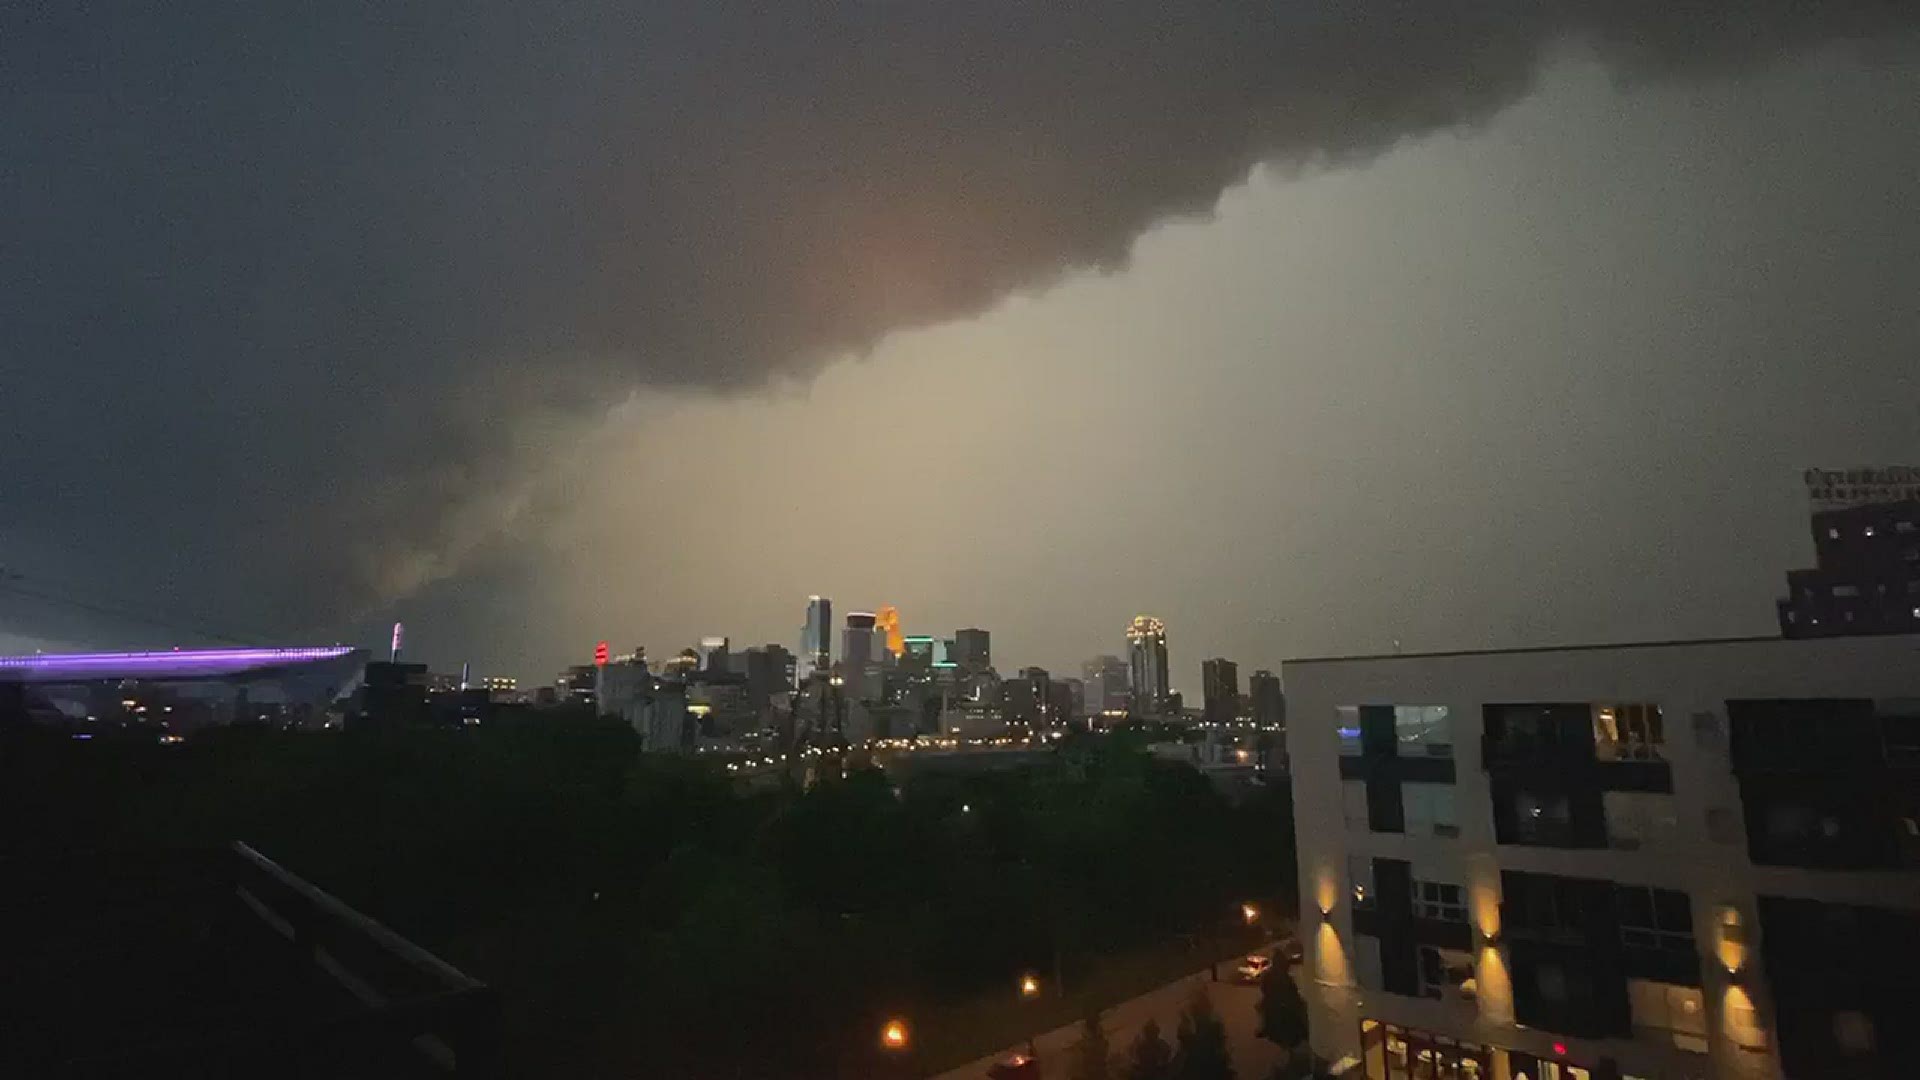 Video submitted by Salina Swanson, shot from Father Hennepin Park in Minneapolis.